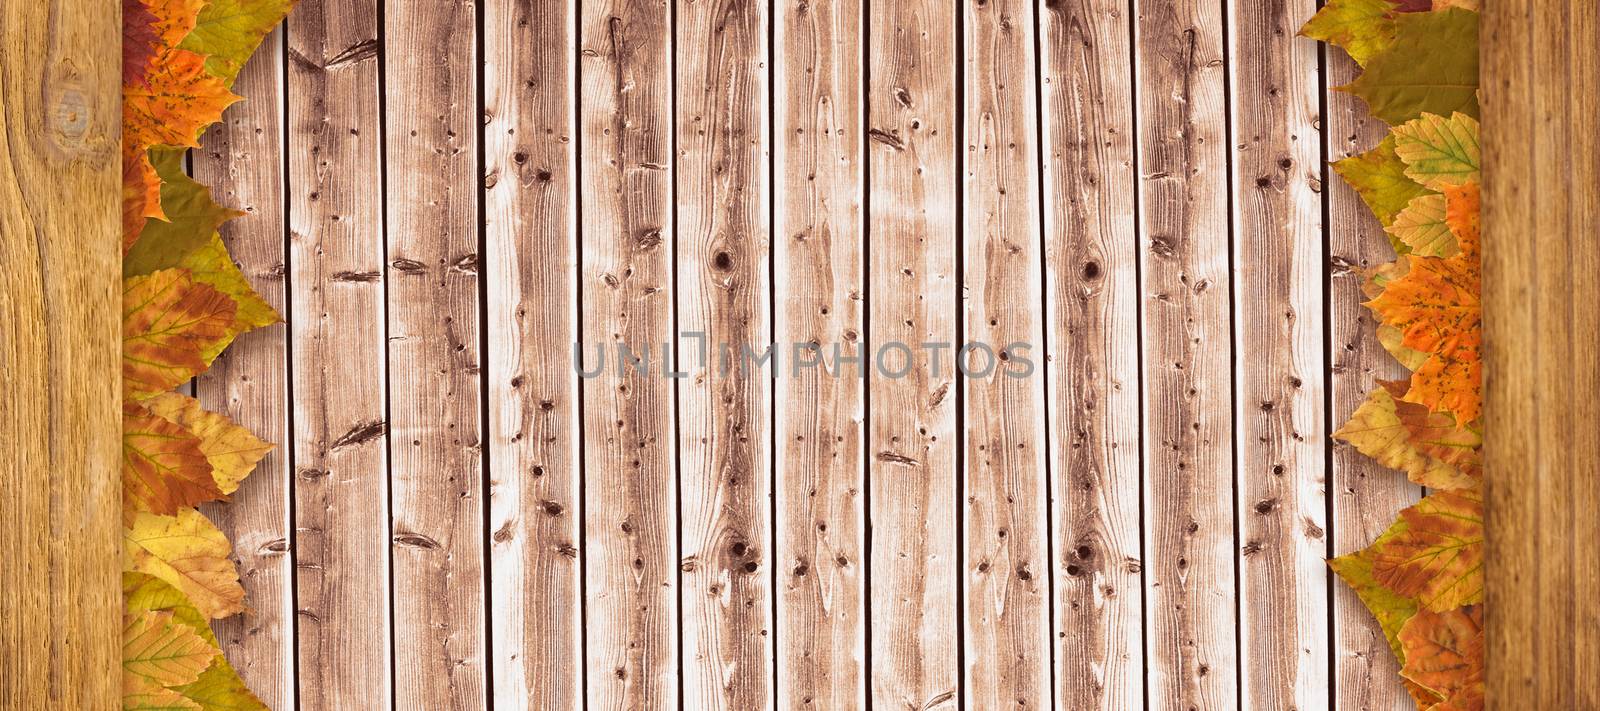 Autumn leaves pattern against wooden planks background